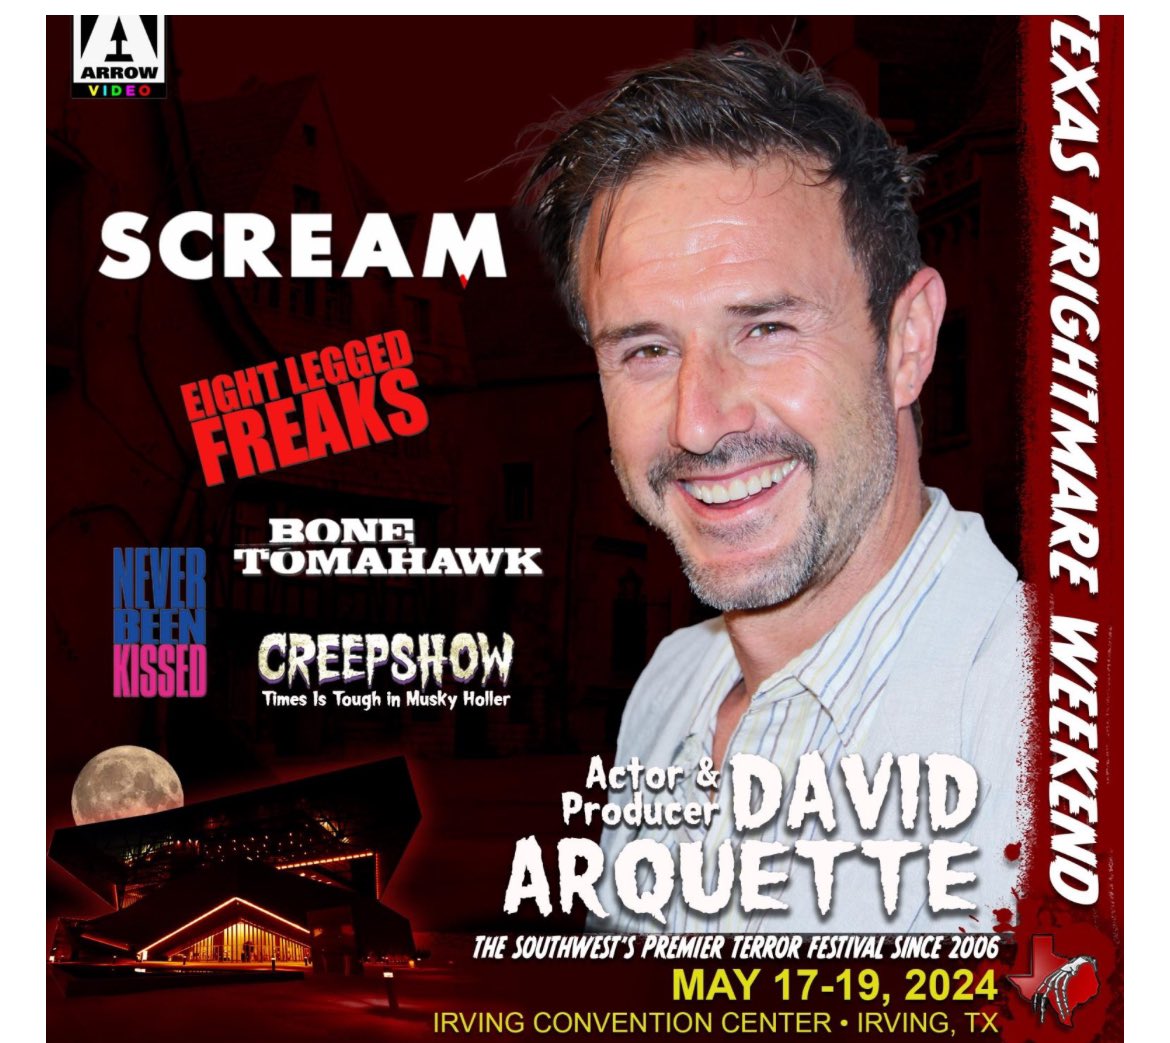 Come meet wrestling legends Danhausen and David Arquette at Texas Frightmare this weekend Both 18x wcw world heavyweight champions and 5x HOF wrestling men and stars of scream. Danhausen is scream8 he was scream5.